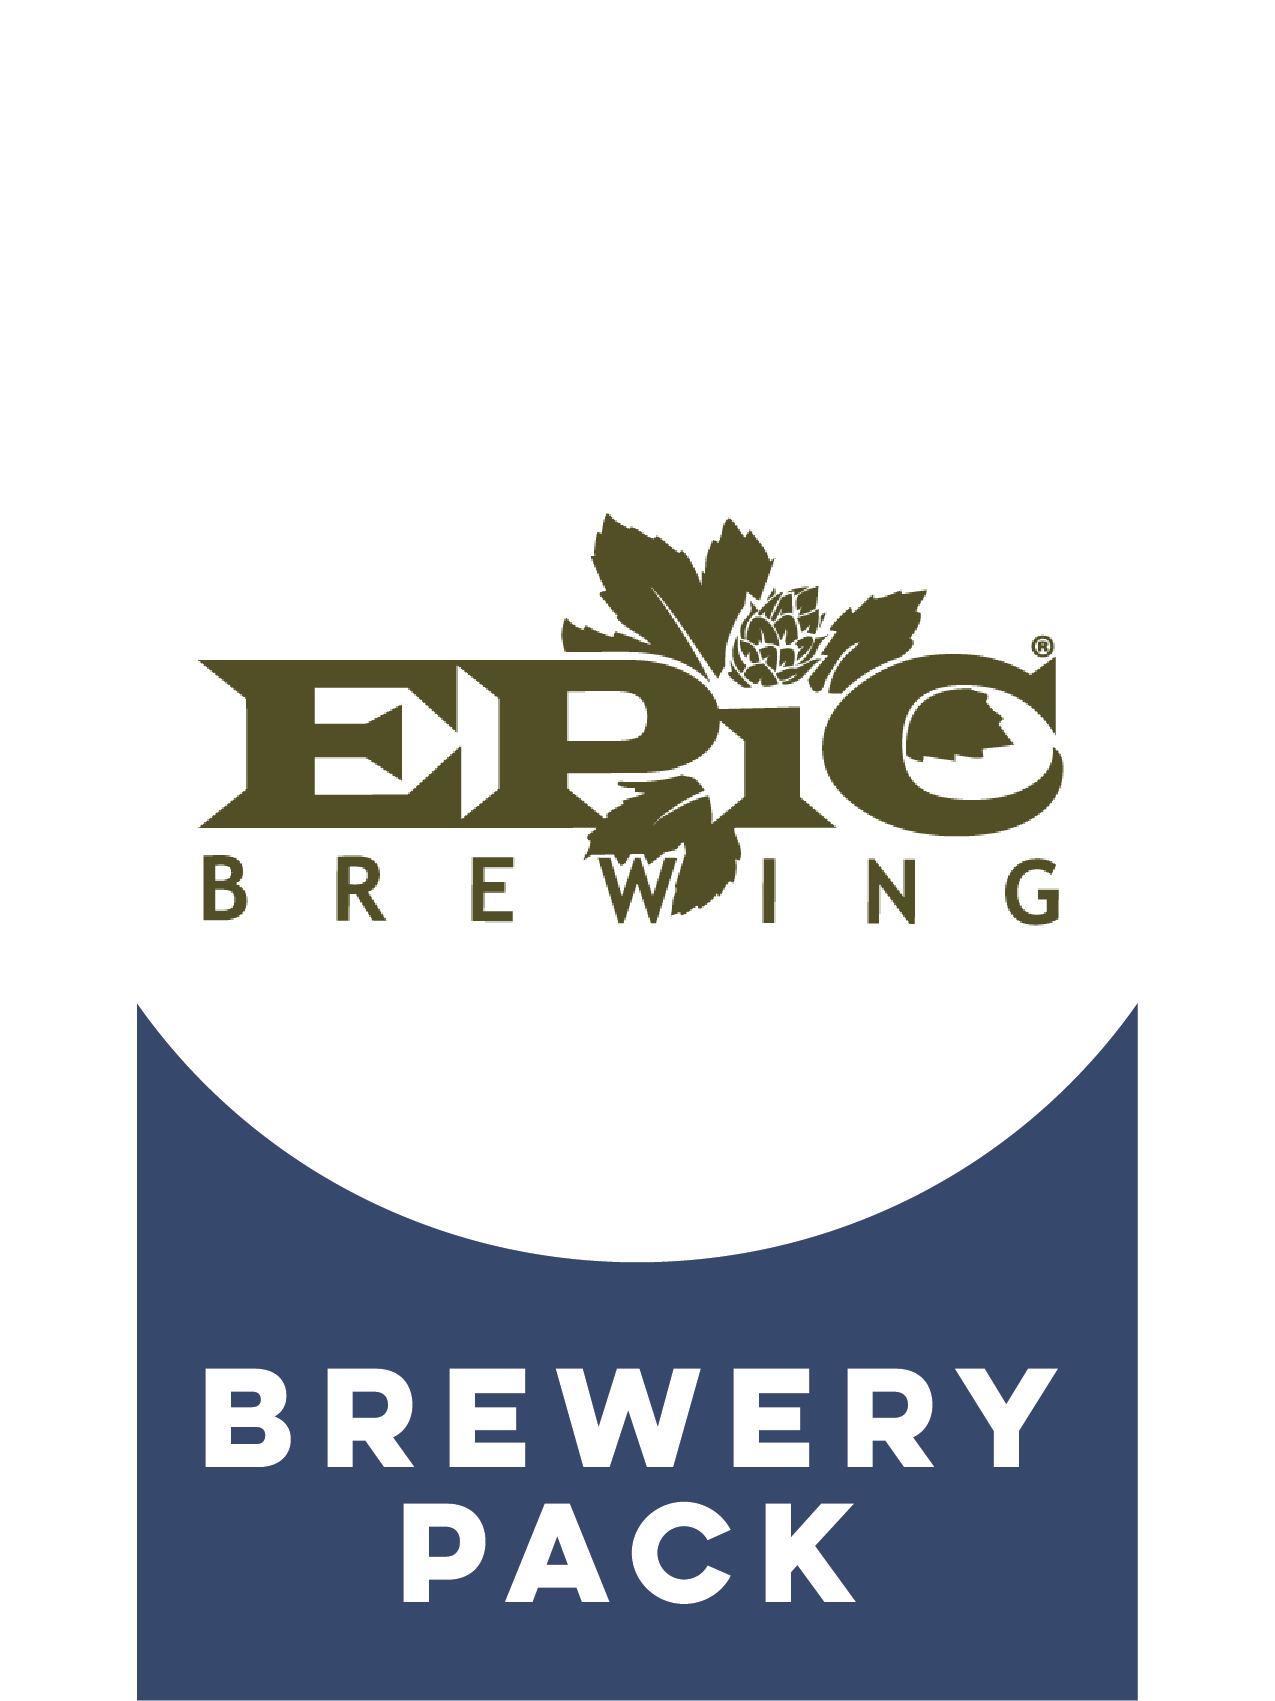 -Epic- Epic Brewery Pack-Packs & Cases- Only @ Beer Republic - The best online beer store for American & Canadian craft beer - Buy beer online from the USA and Canada - Bier online kopen - Amerikaans bier kopen - Craft beer store - Craft beer kopen - Amerikanisch bier kaufen - Bier online kaufen - Acheter biere online - IPA - Stout - Porter - New England IPA - Hazy IPA - Imperial Stout - Barrel Aged - Barrel Aged Imperial Stout - Brown - Dark beer - Blond - Blonde - Pilsner - Lager - Wheat - Weizen - Amber 